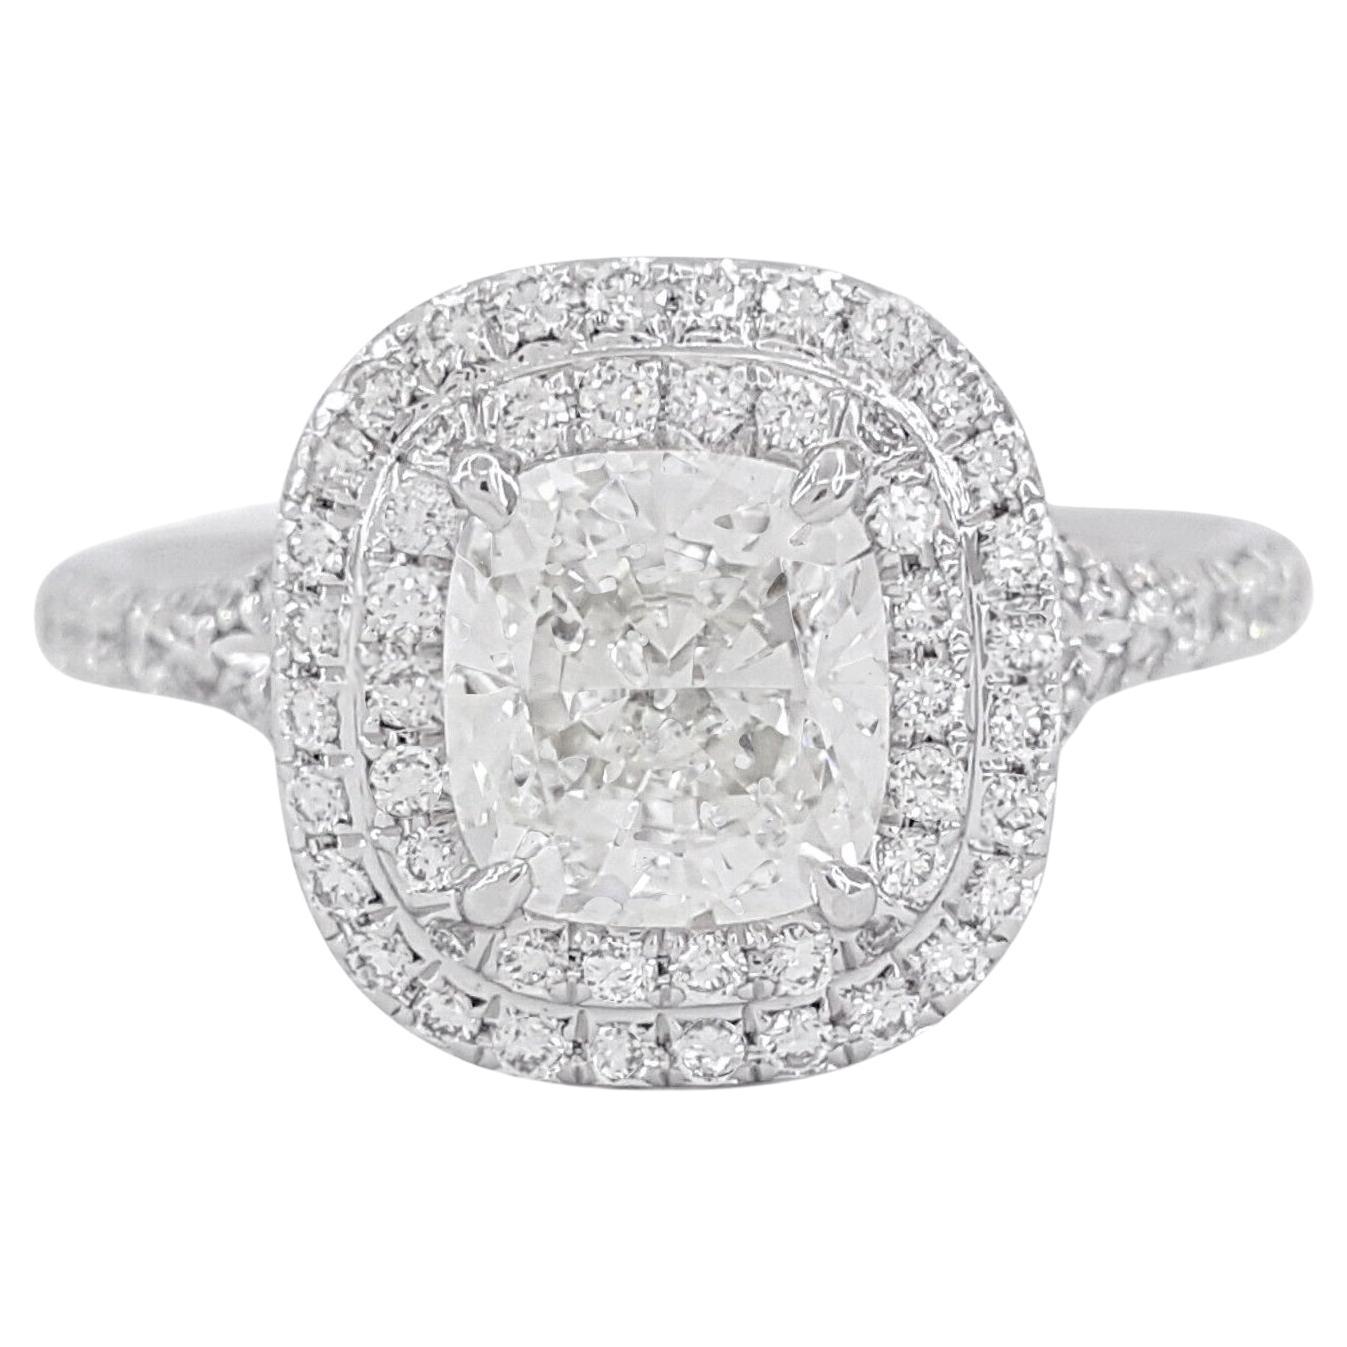 Tiffany & Co. Platinum Soleste® 1.52 ct Cushion Excellent Ideal Cut Diamond Double Halo Engagement Ring.

The ring weighs 4.7 grams, size 4, the center stone is a Cushion Brilliant Cut Diamond weighing 1.12 ct, G in color, VVS2 in clarity. The